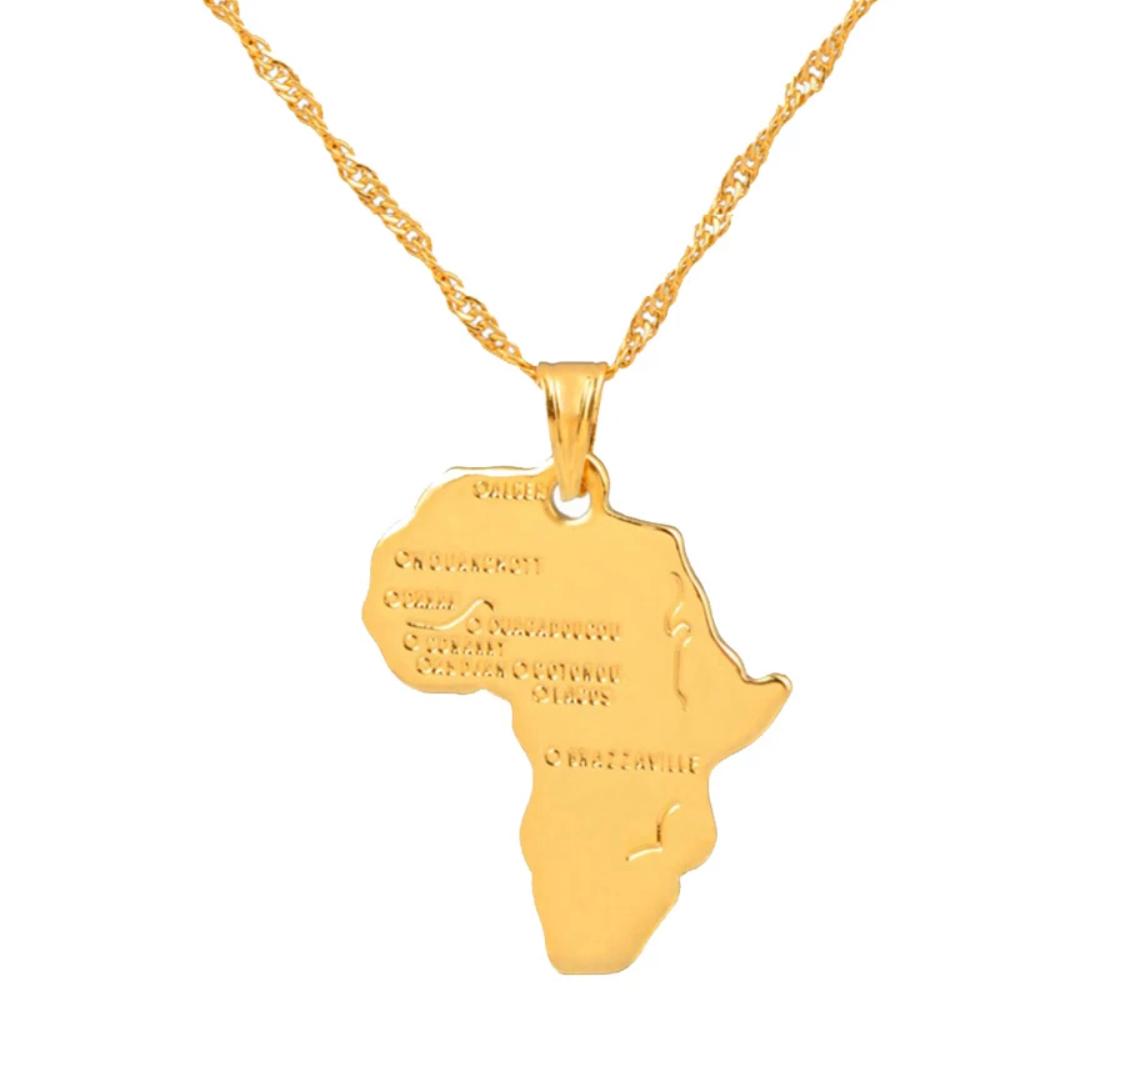 Ethiopian - Africa Map Pendant Necklace for Women and Men